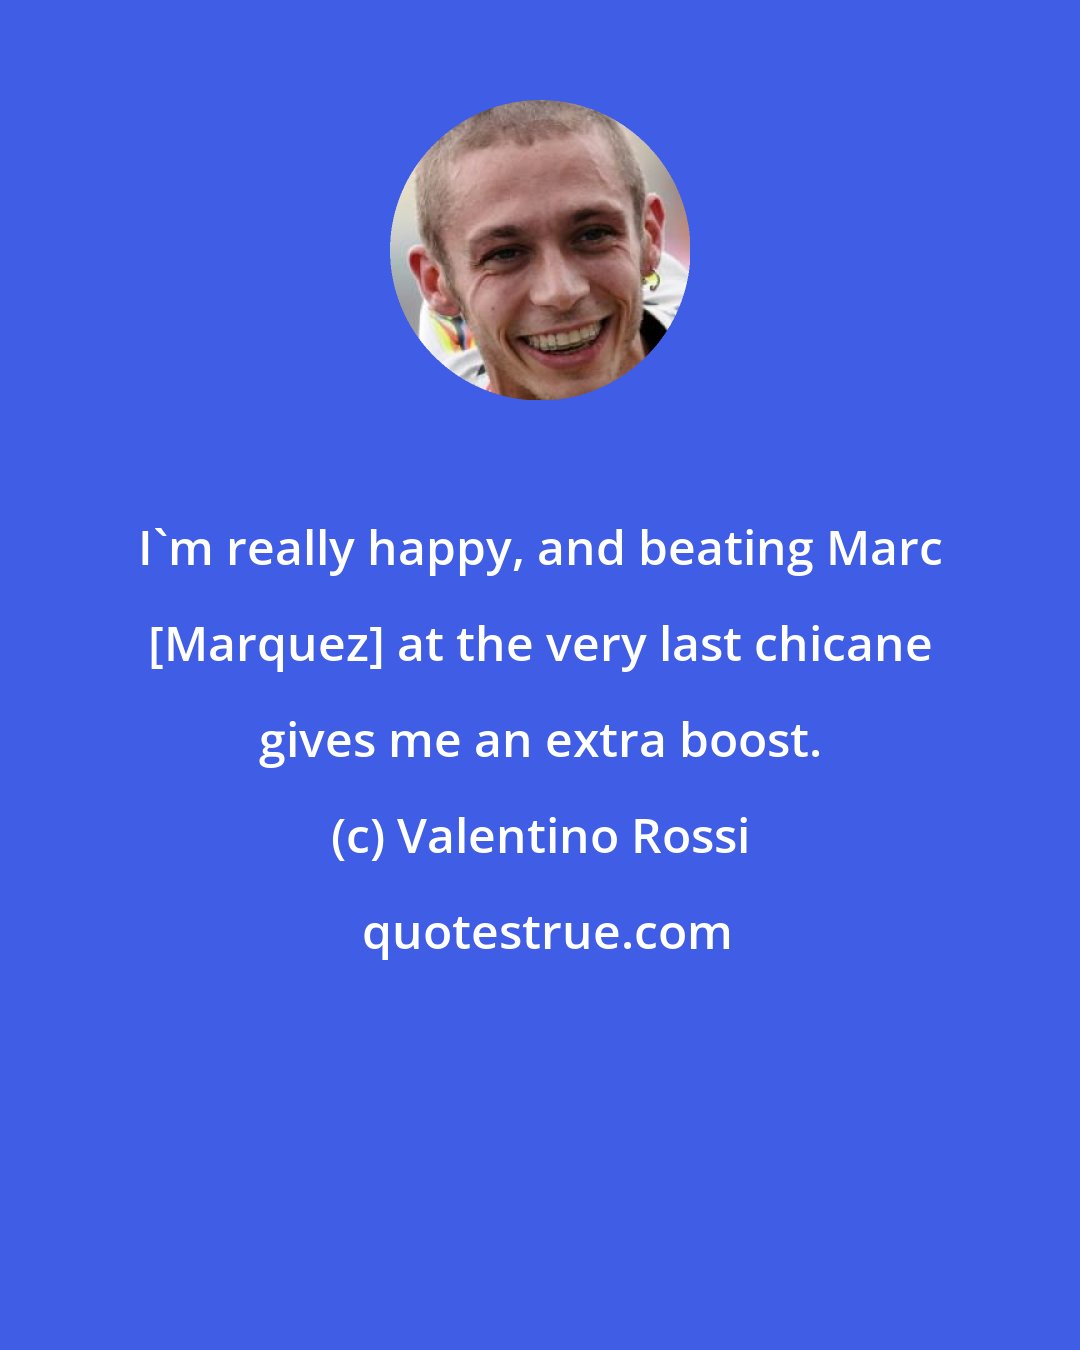 Valentino Rossi: I'm really happy, and beating Marc [Marquez] at the very last chicane gives me an extra boost.